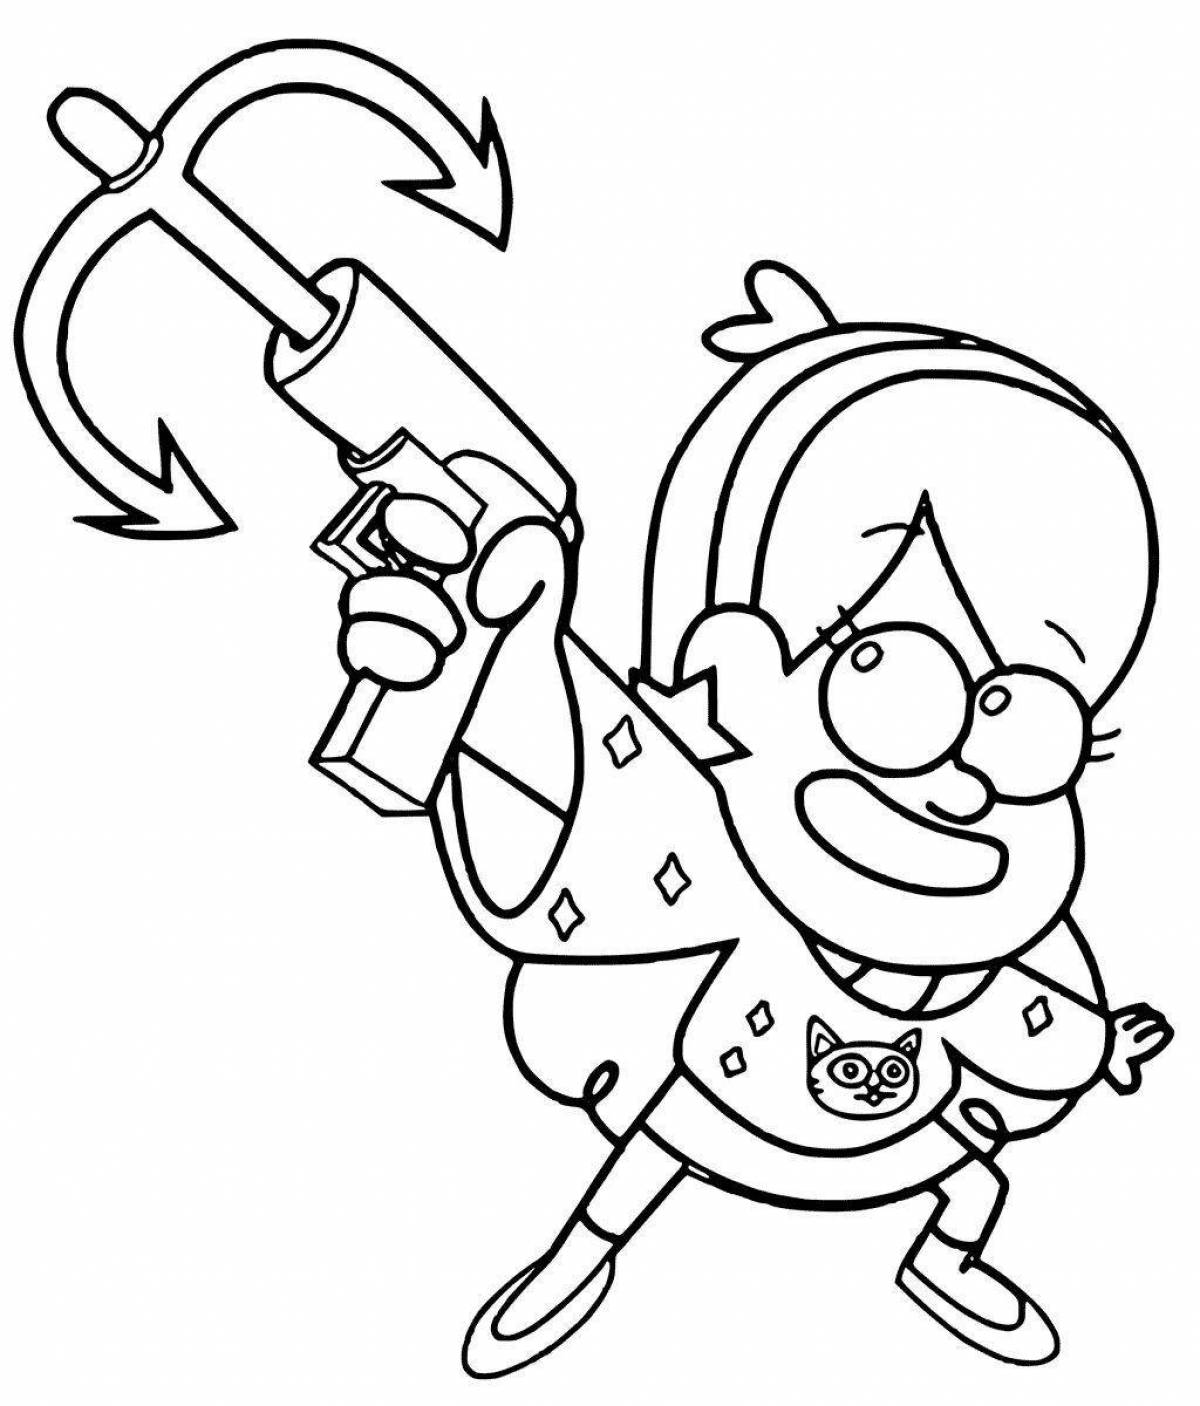 Gravity falls live coloring page